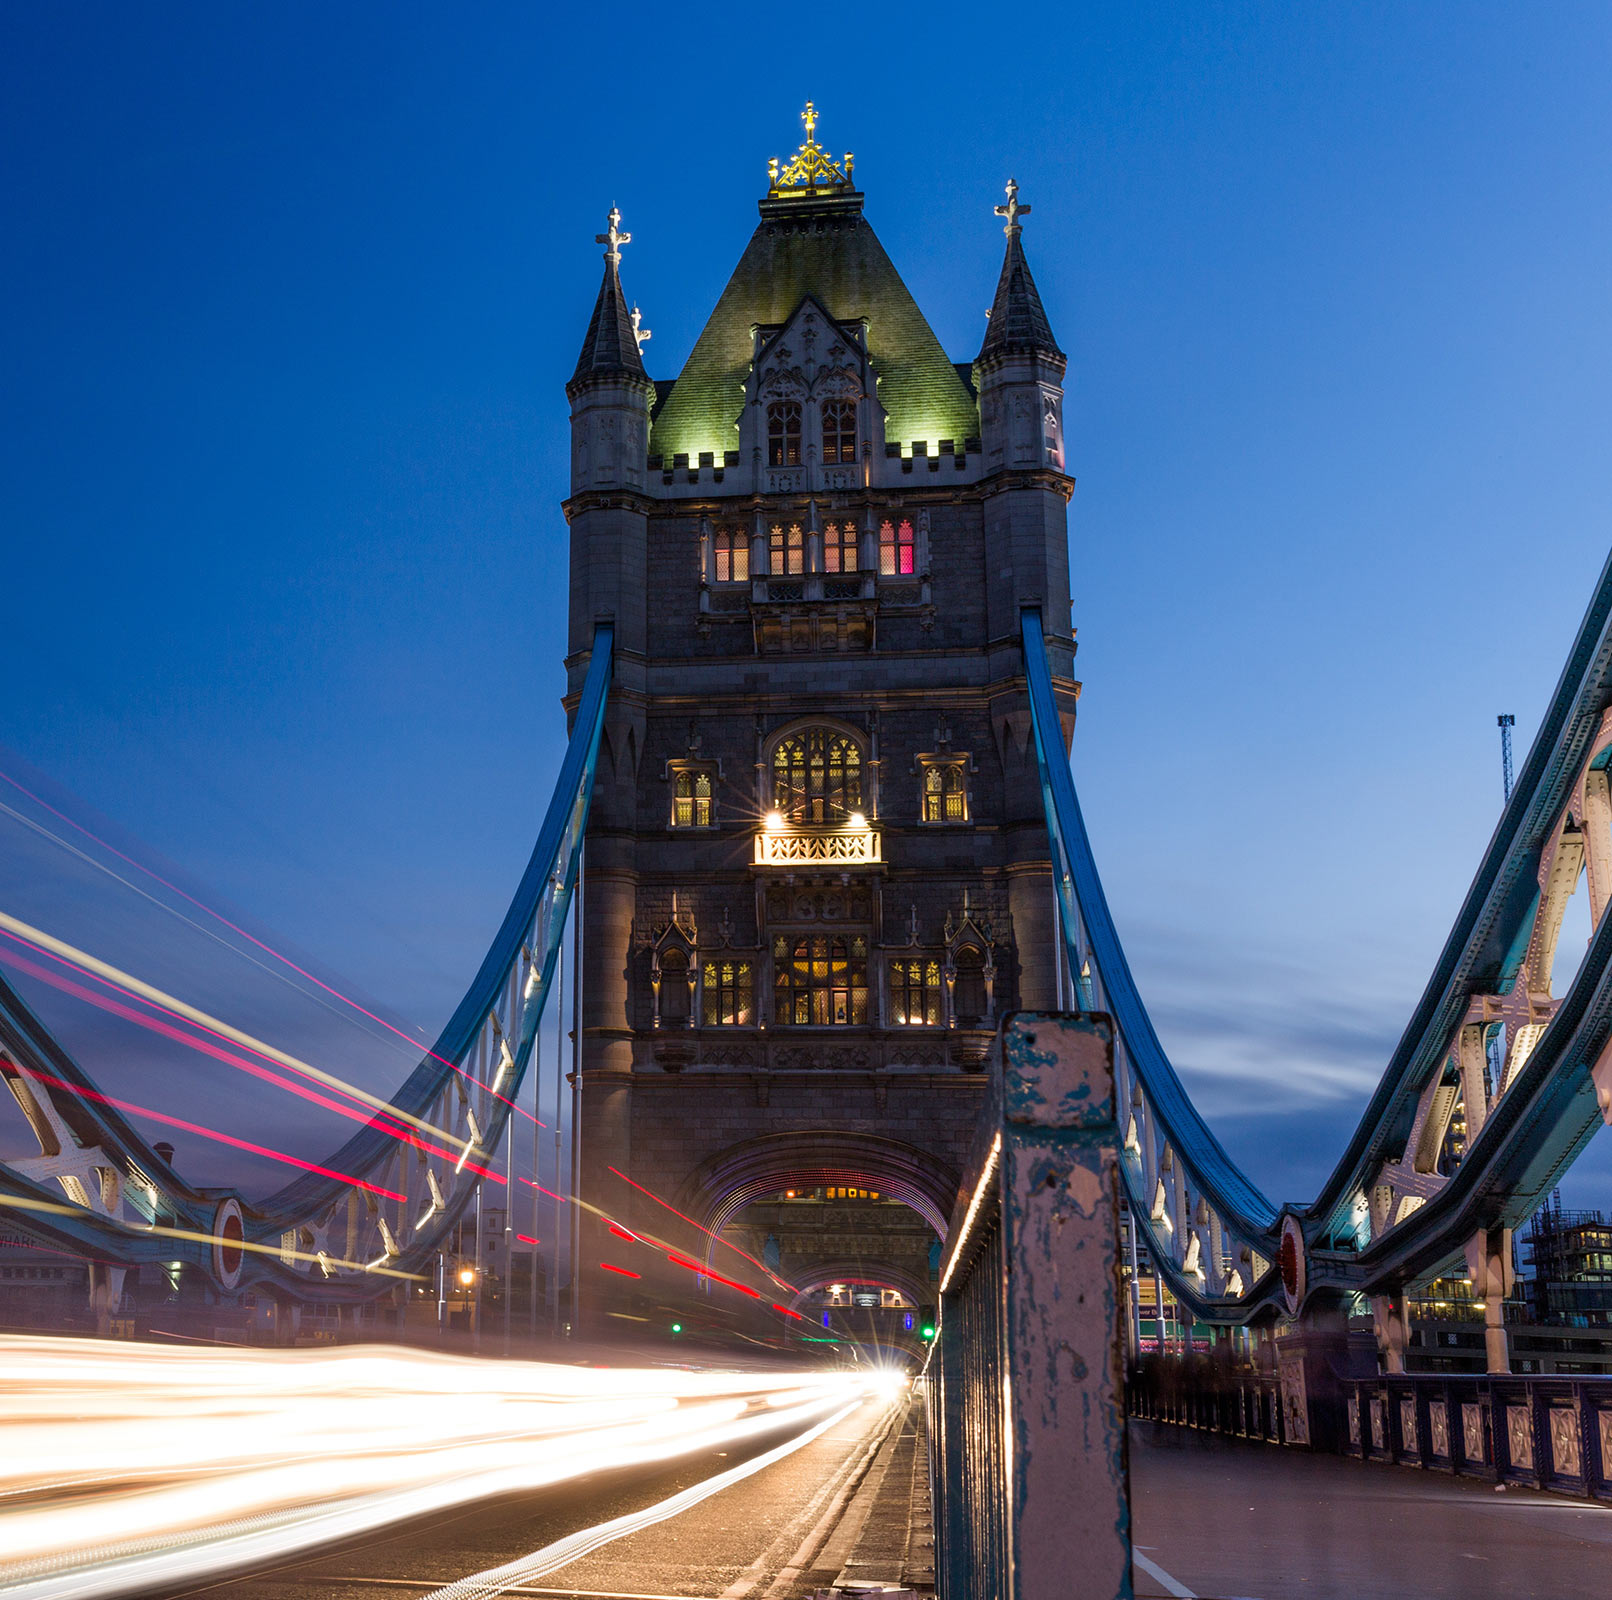 An image of Tower Bridge in London